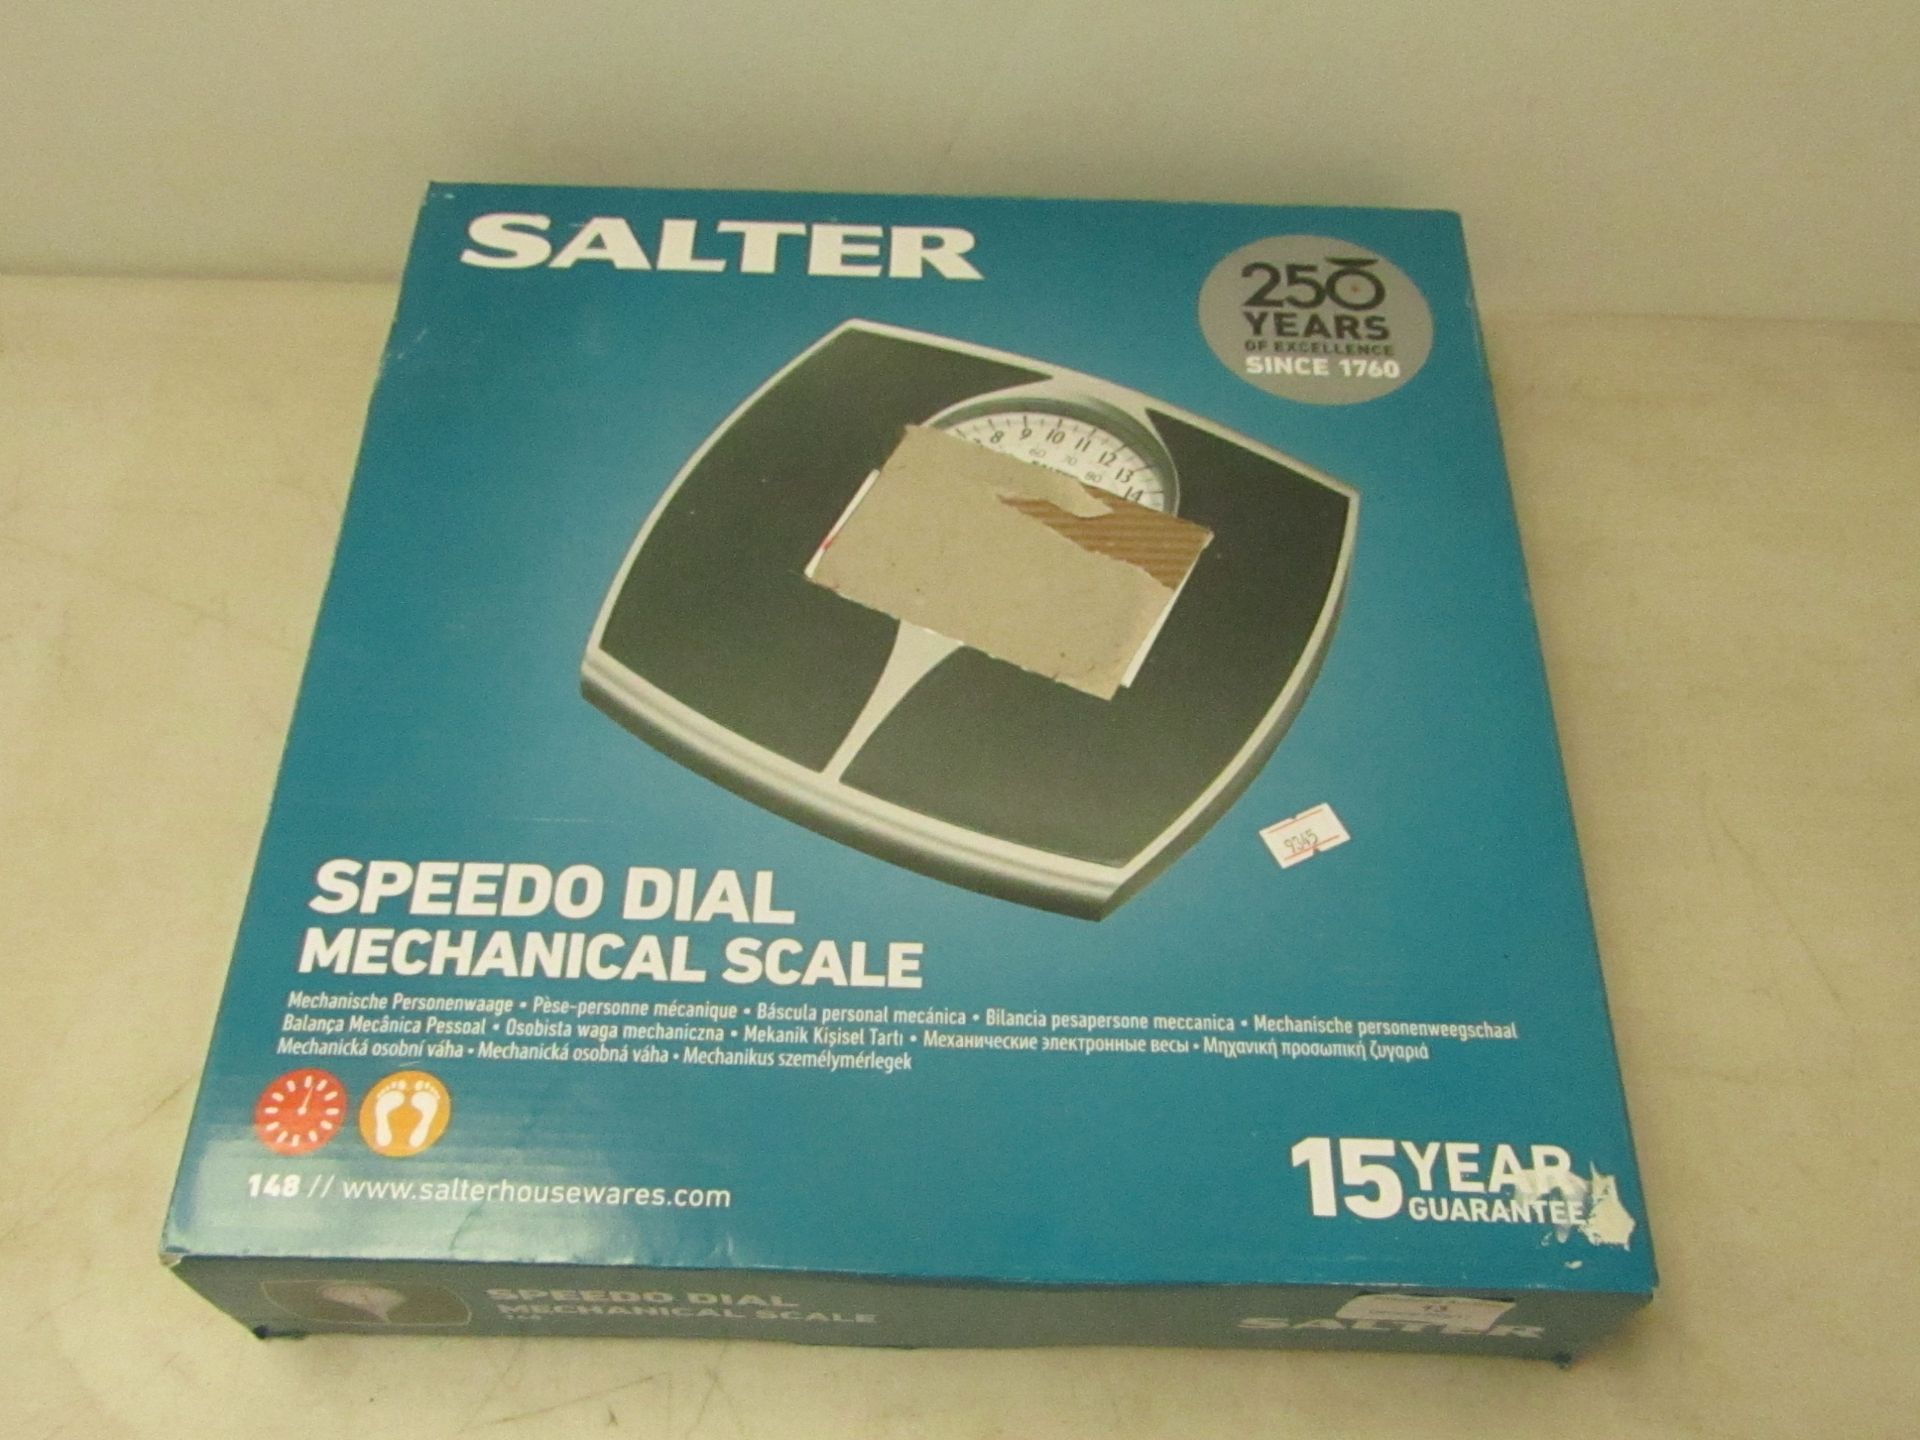 Salter speedo dial mechanical scale, unchecked and boxed.